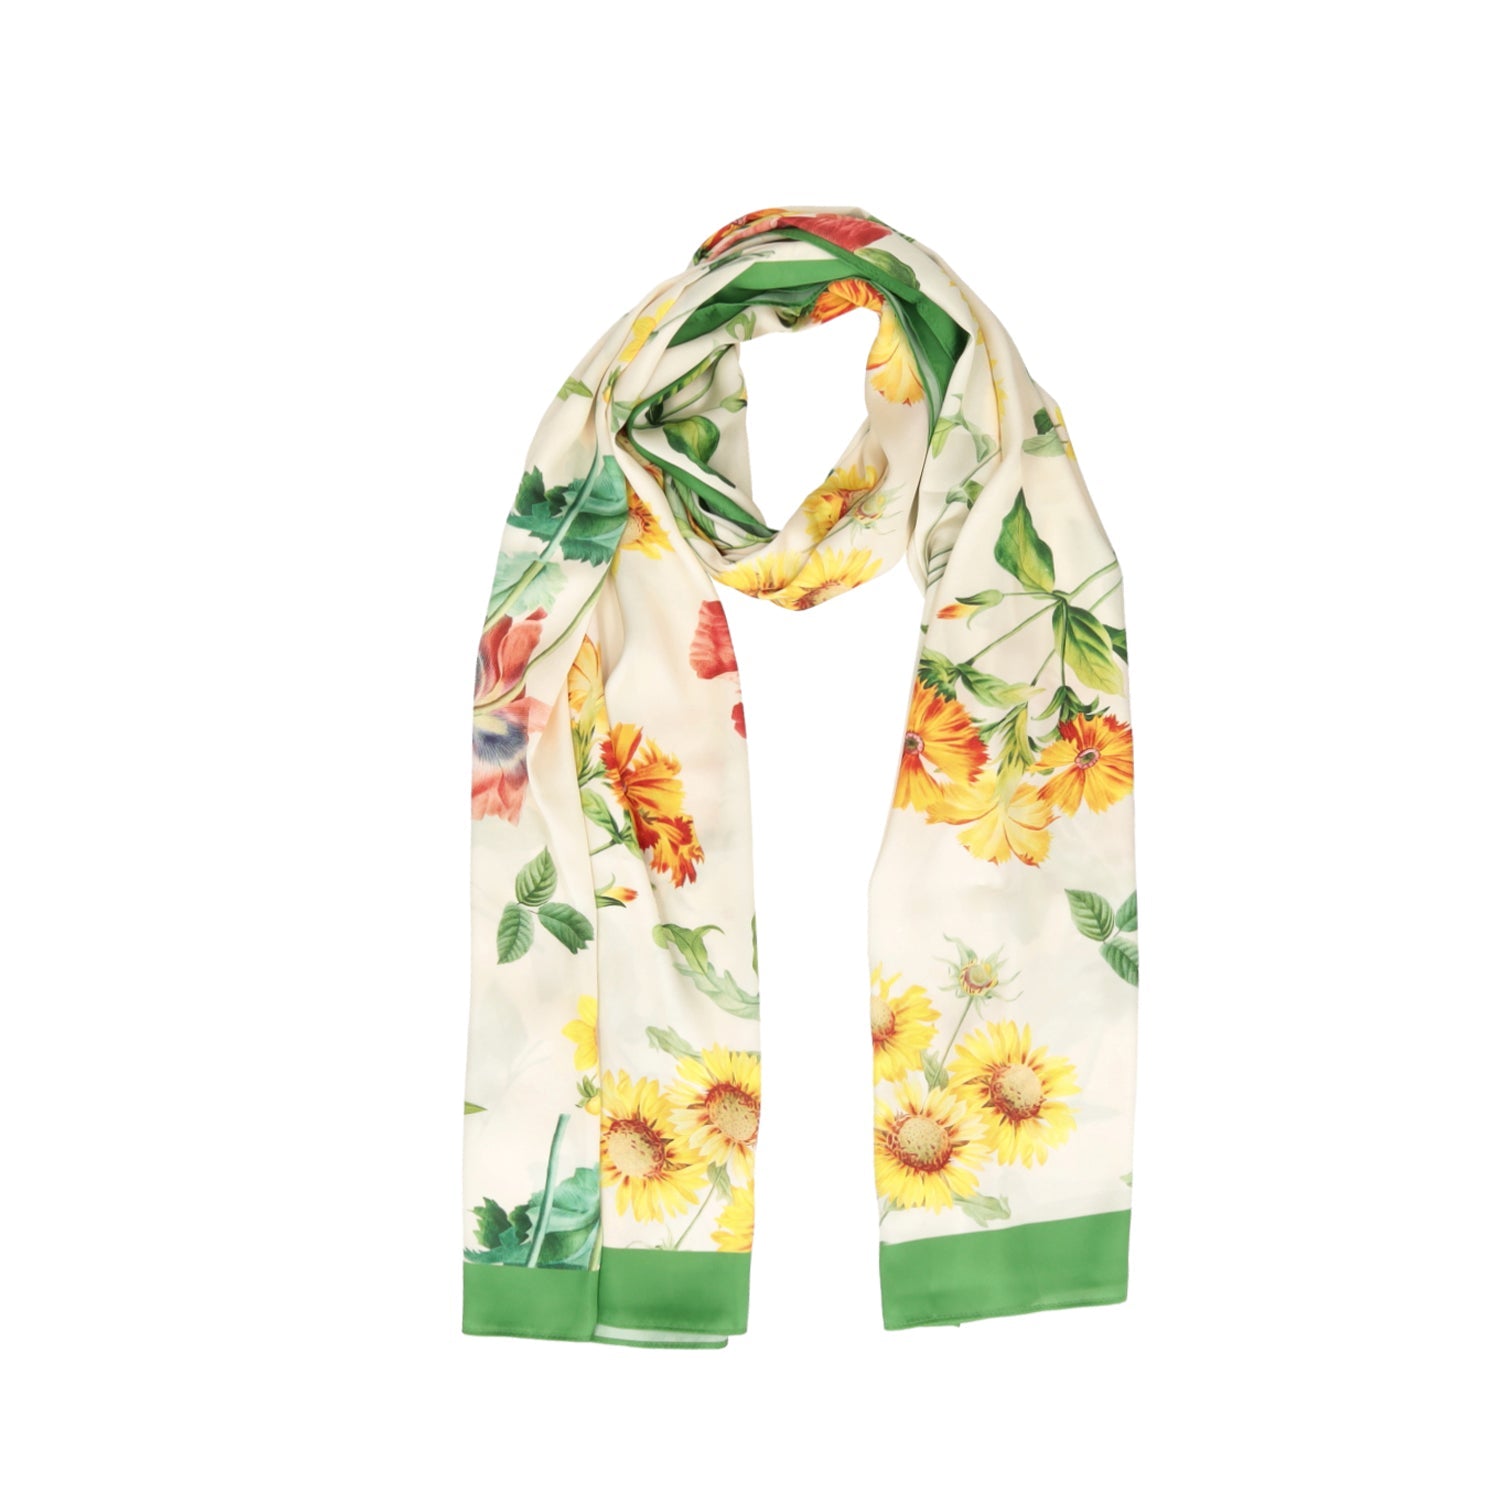 MULTICOLOR GIADA SCARF WITH FLORAL PRINT